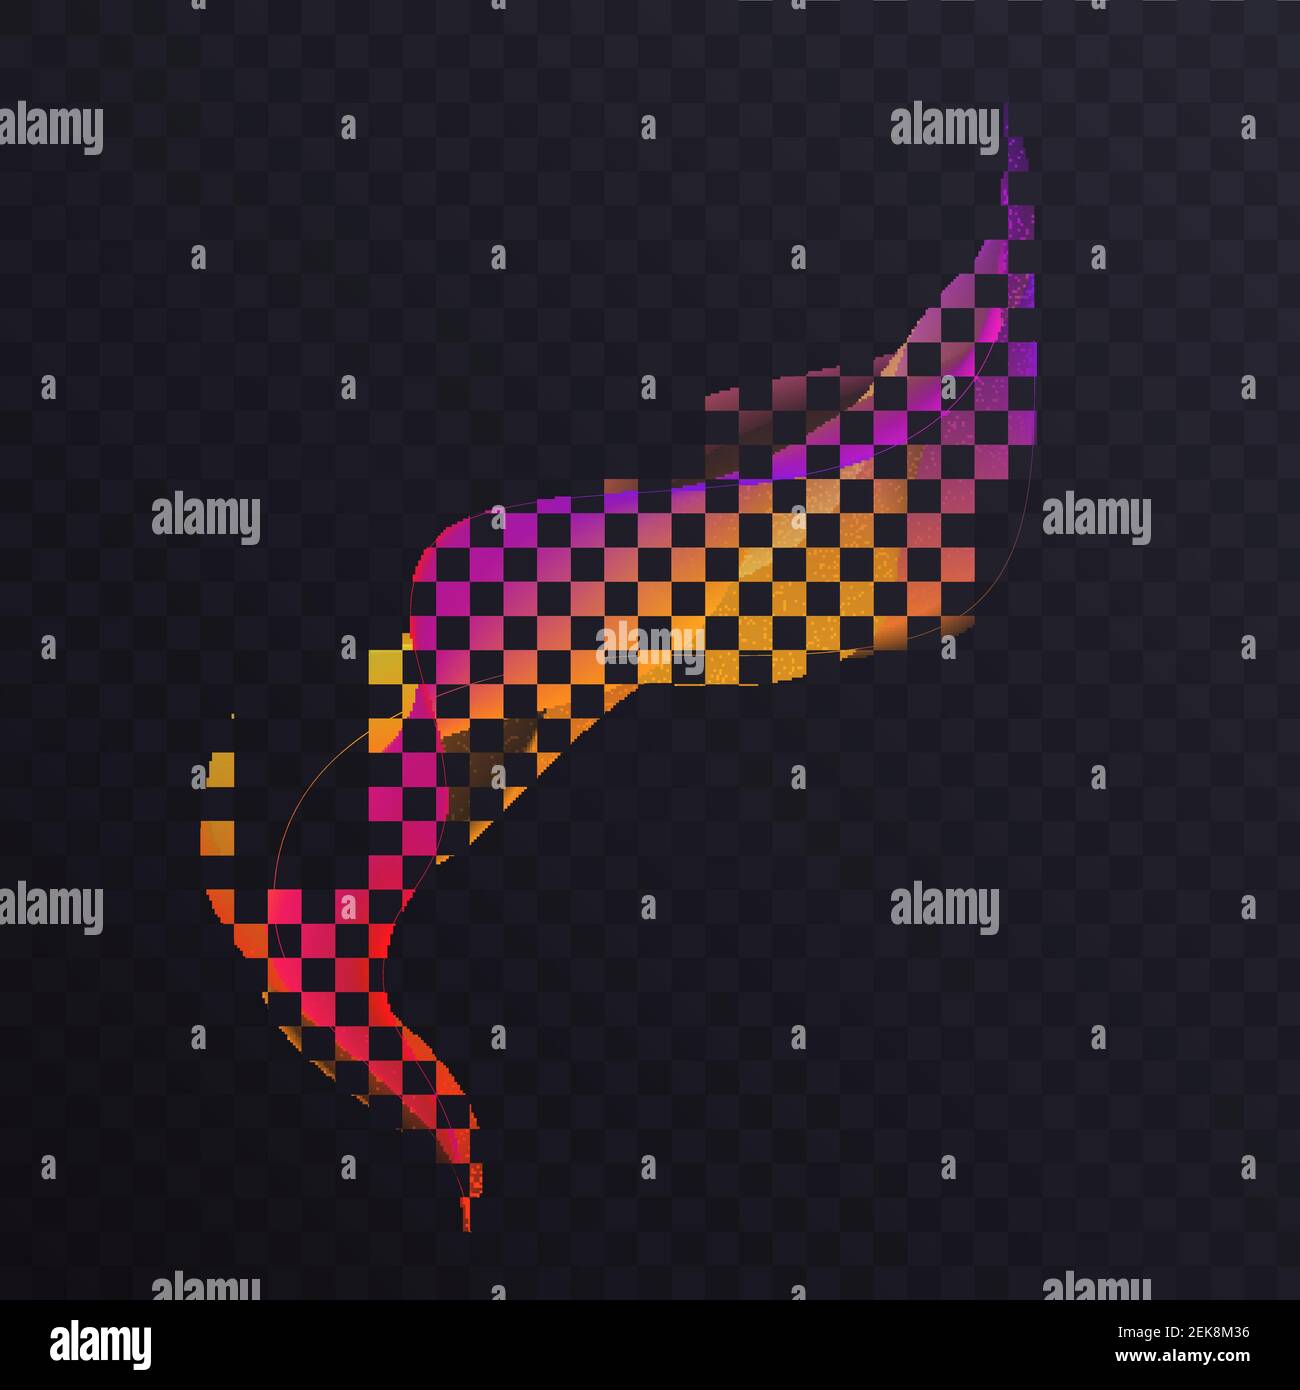 Abstract luminous wavy shape with gradient light effect vector illustration. Magic spiral tail, wave design template element with yellow red magenta bright colors on transparent dark background Stock Vector